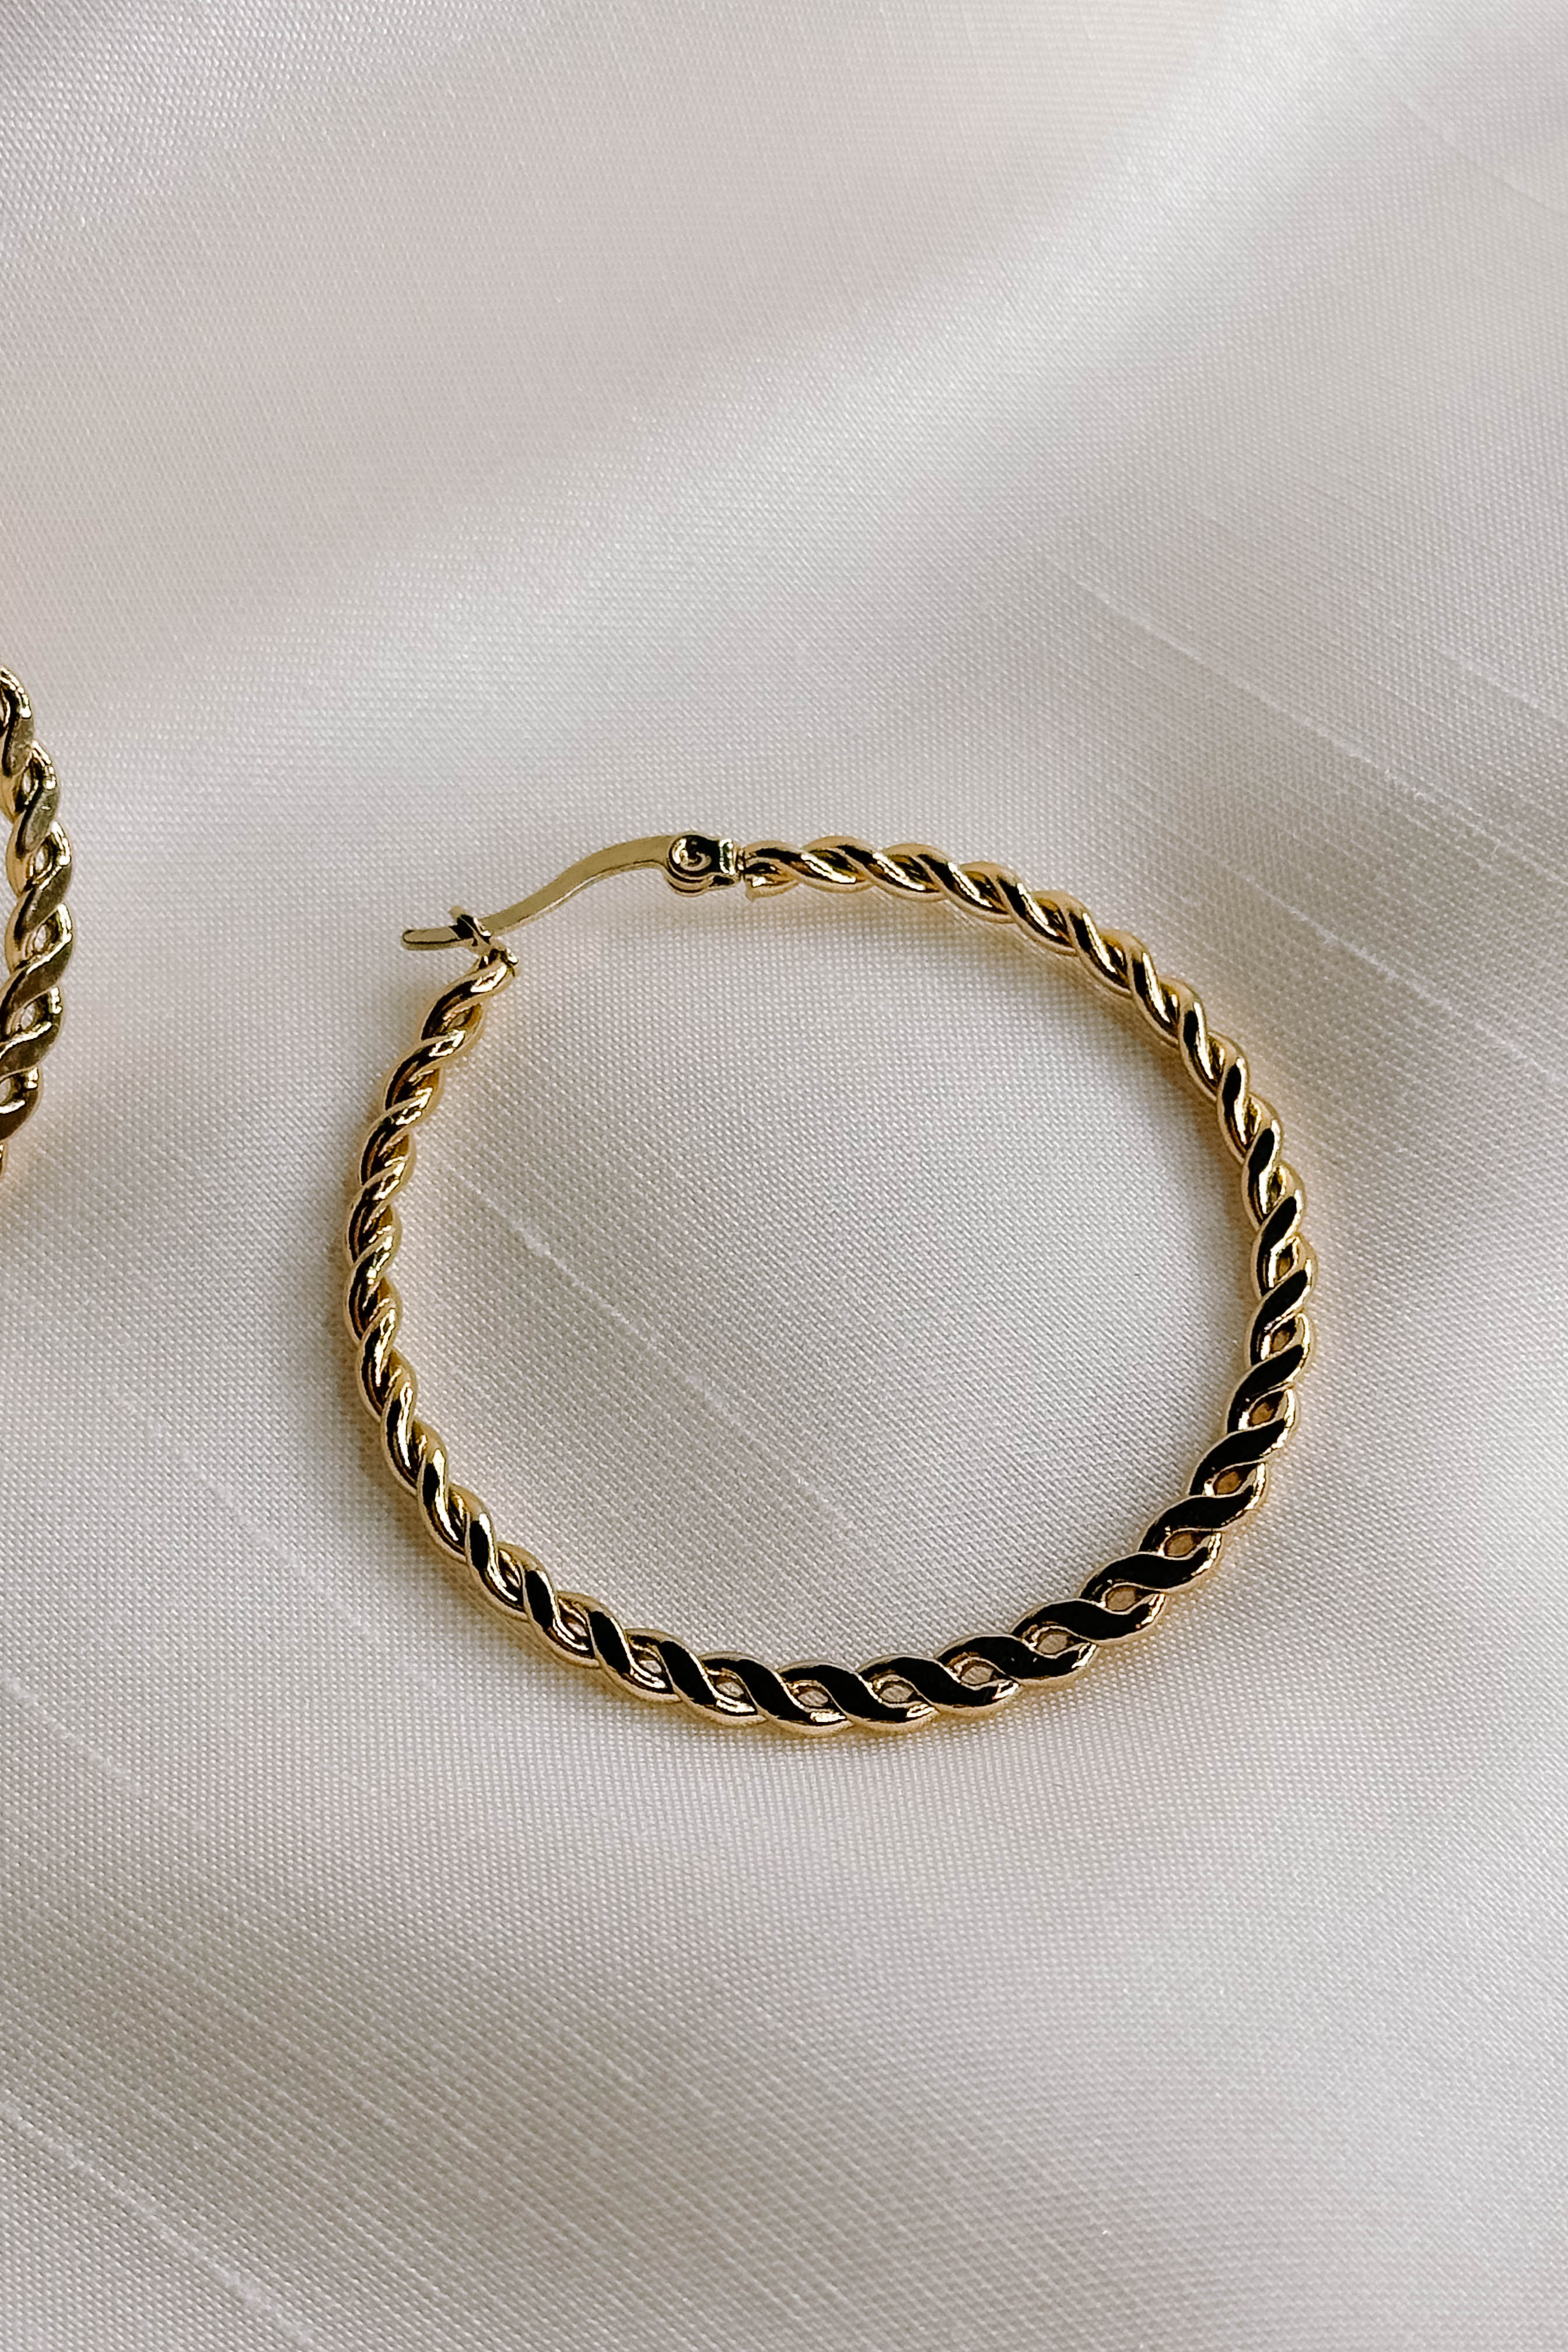 Side view of the Reese Gold Rope Hoop Earrings that feature medium closed hoops with a gold rope design and latch closures, shown against a cream fabric.